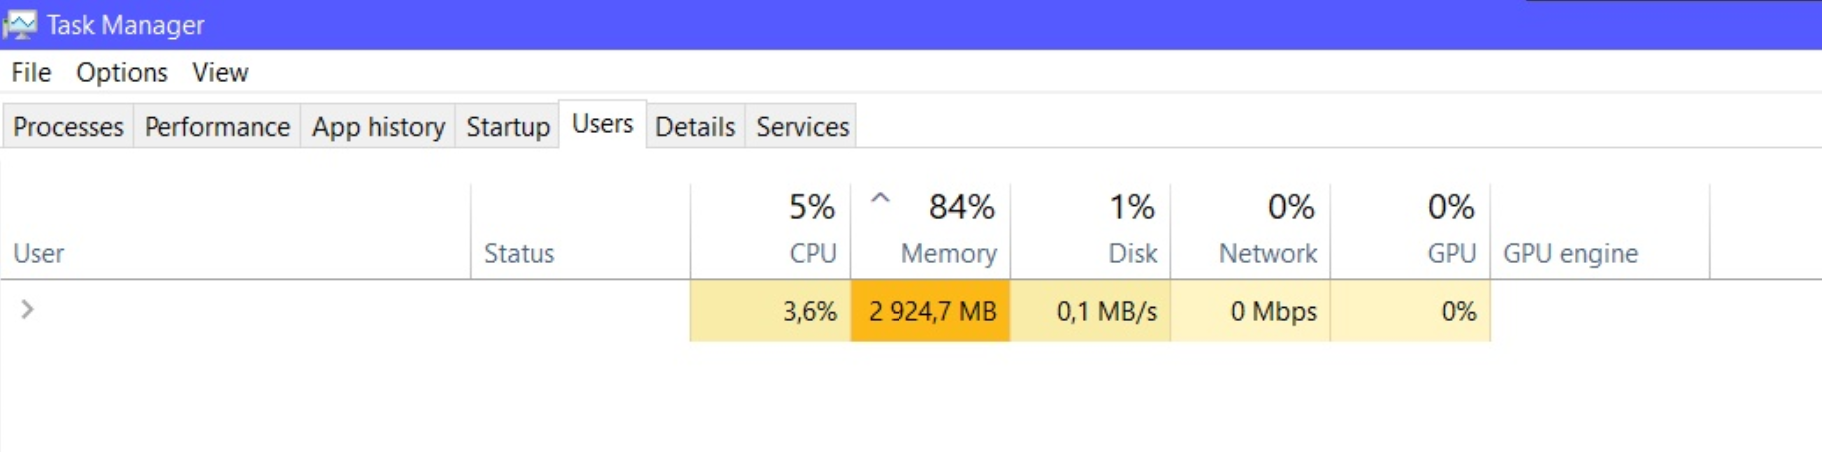 Unexplained high memory usage 8ad53a1e-2ab8-40f6-b035-bf7645c4e0a8?upload=true.png